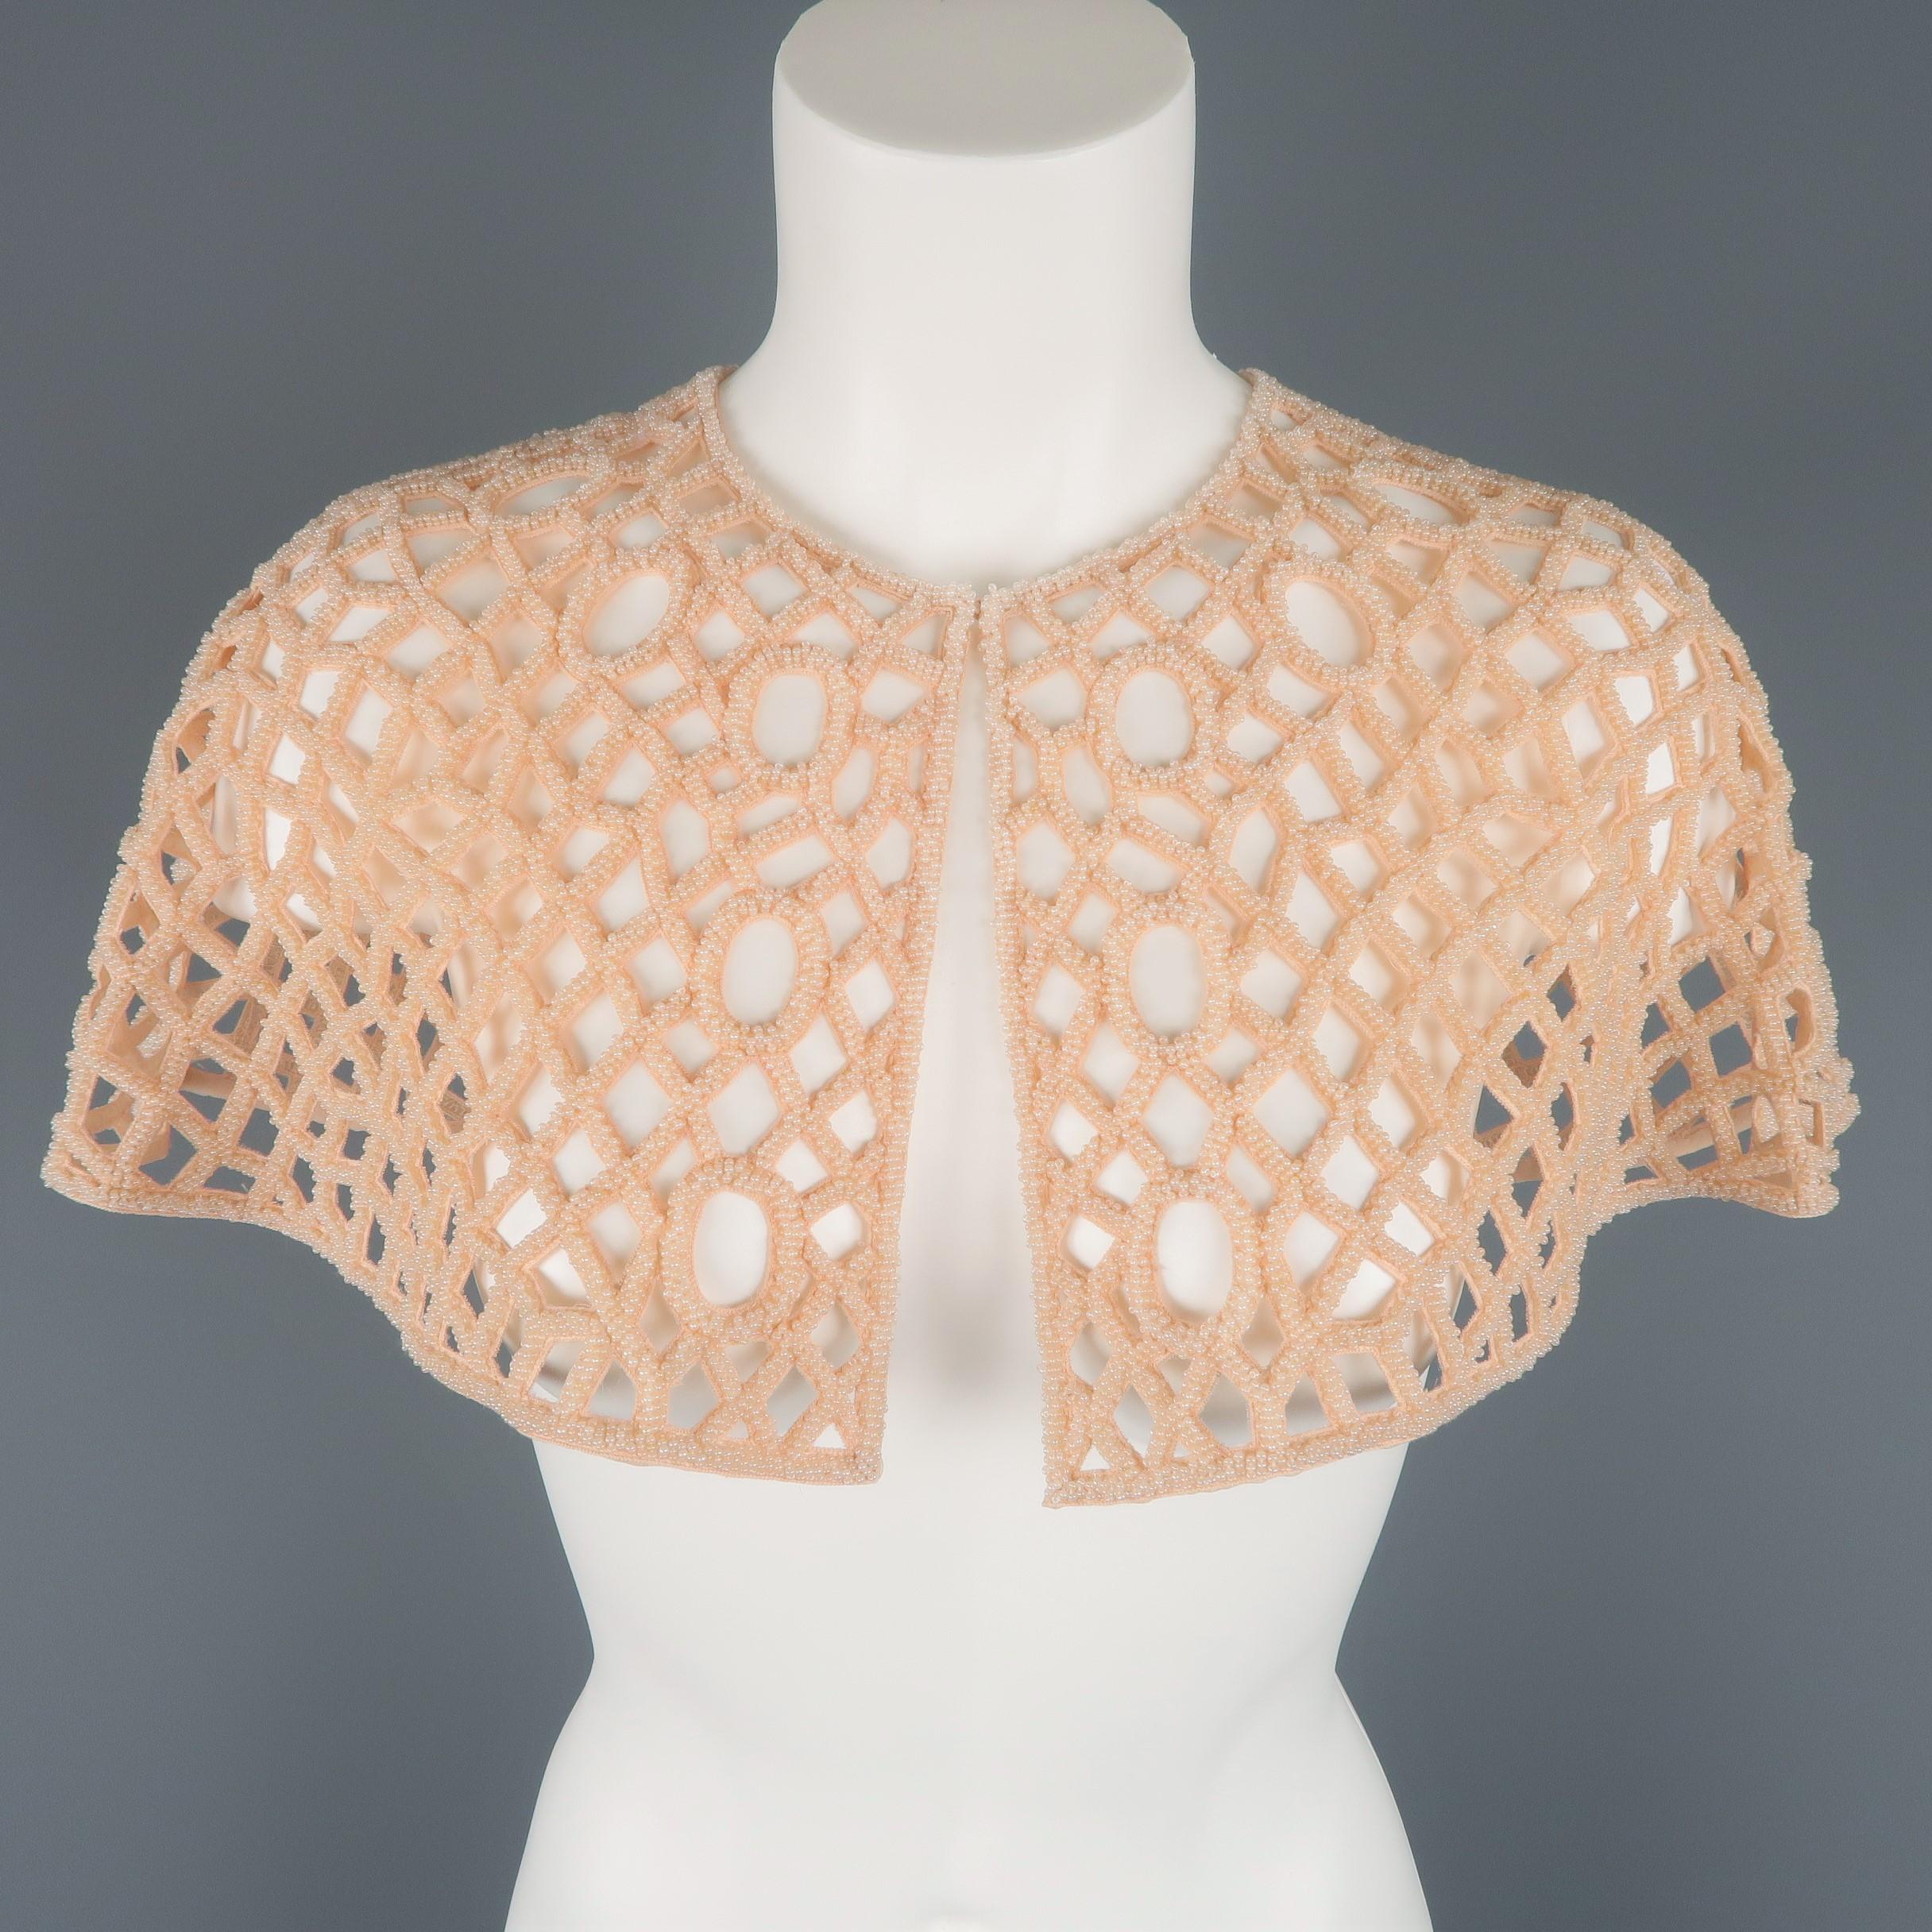 Joanna Mastroianni capelet comes in light salmon pink geometric cutout mesh fabric with beadwork throughout and hook eye closure. Made in USA.  Retailed: $1800.00
Very Good Pre-Owned Condition.
 
Measurements:
Length: 10 in.
Width: 25 in.